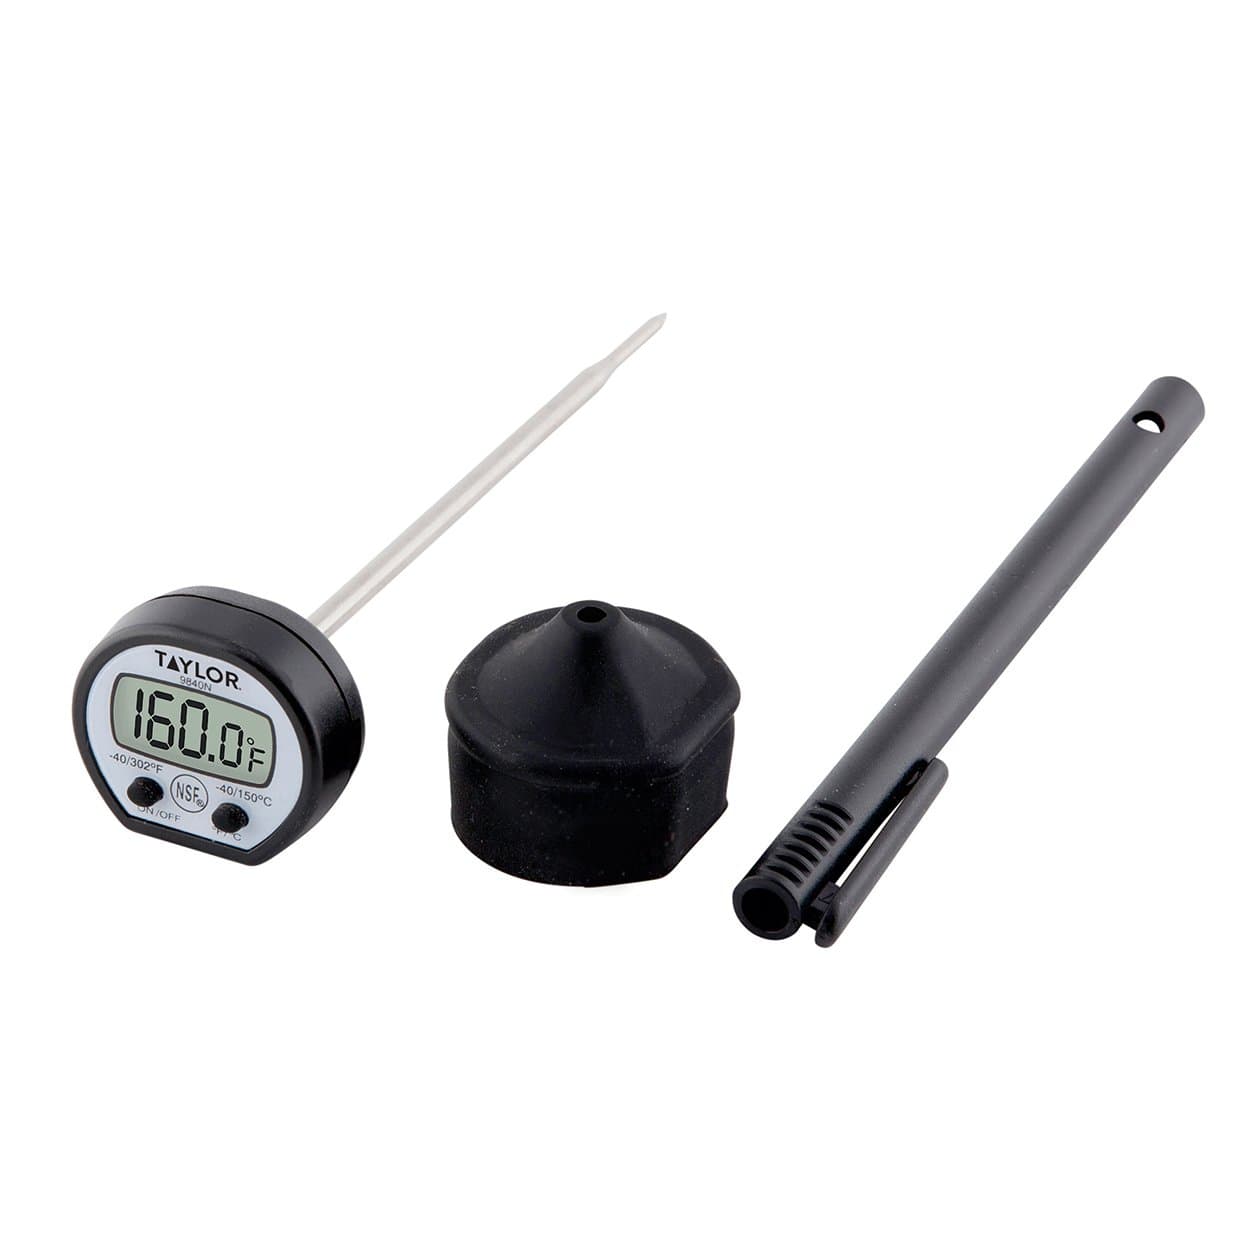 Taylor 3518N Cooking Thermometer, Digital Type, 32° to 392°F